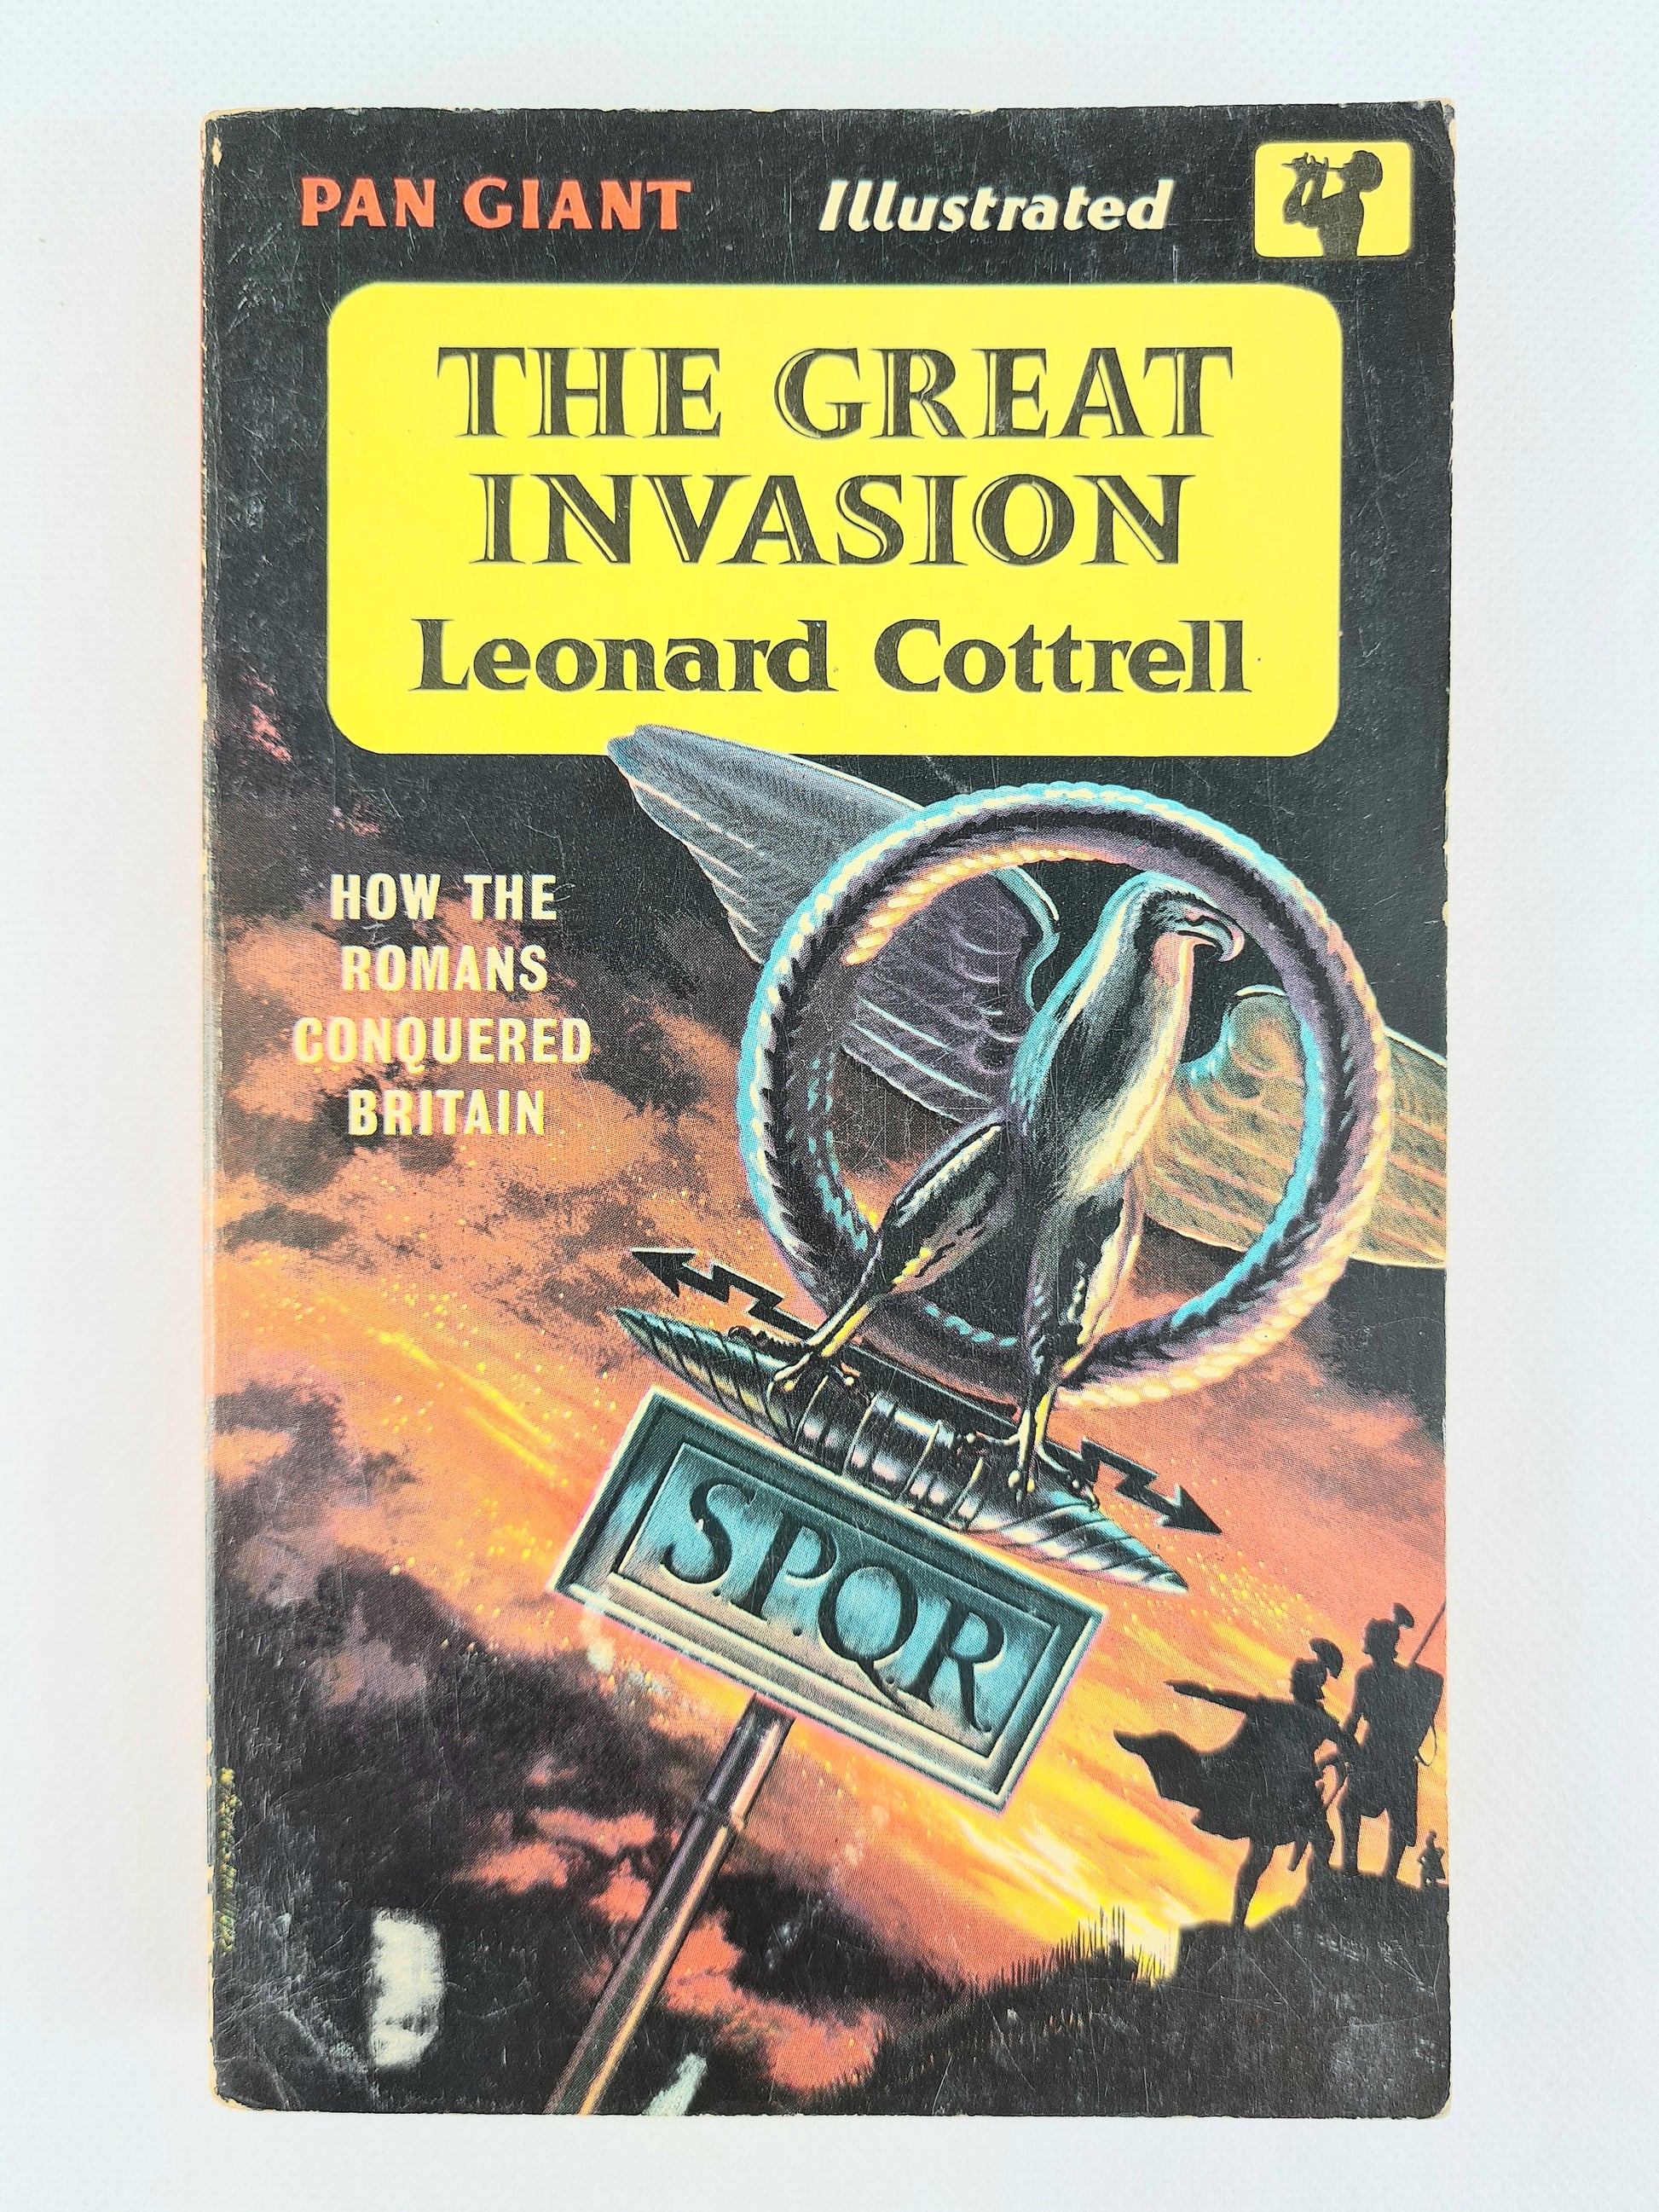 The great invasion by Leonard cottrell. Vintage Pan books 